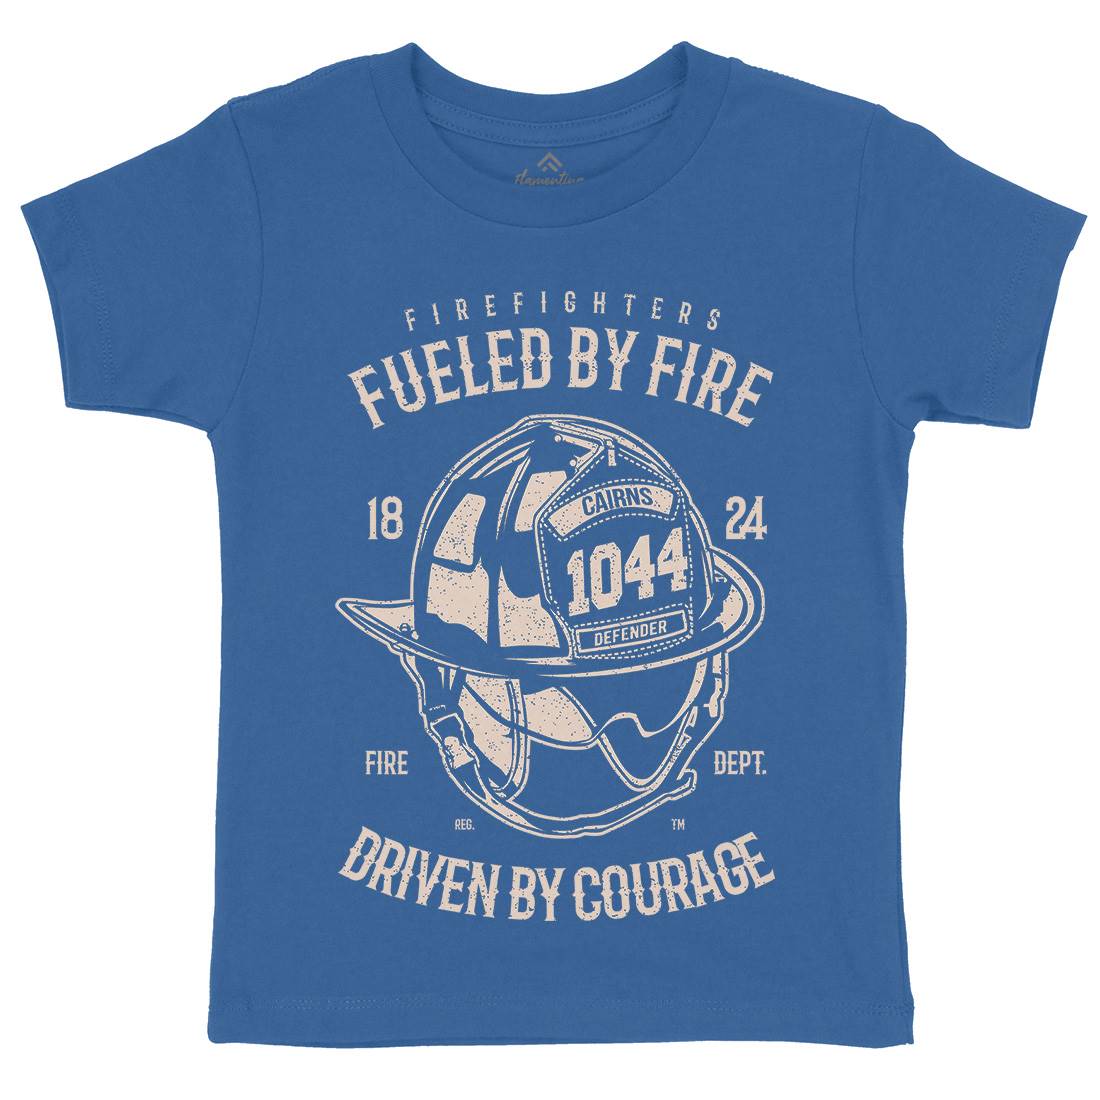 Fuelled By Fire Kids Crew Neck T-Shirt Firefighters A667